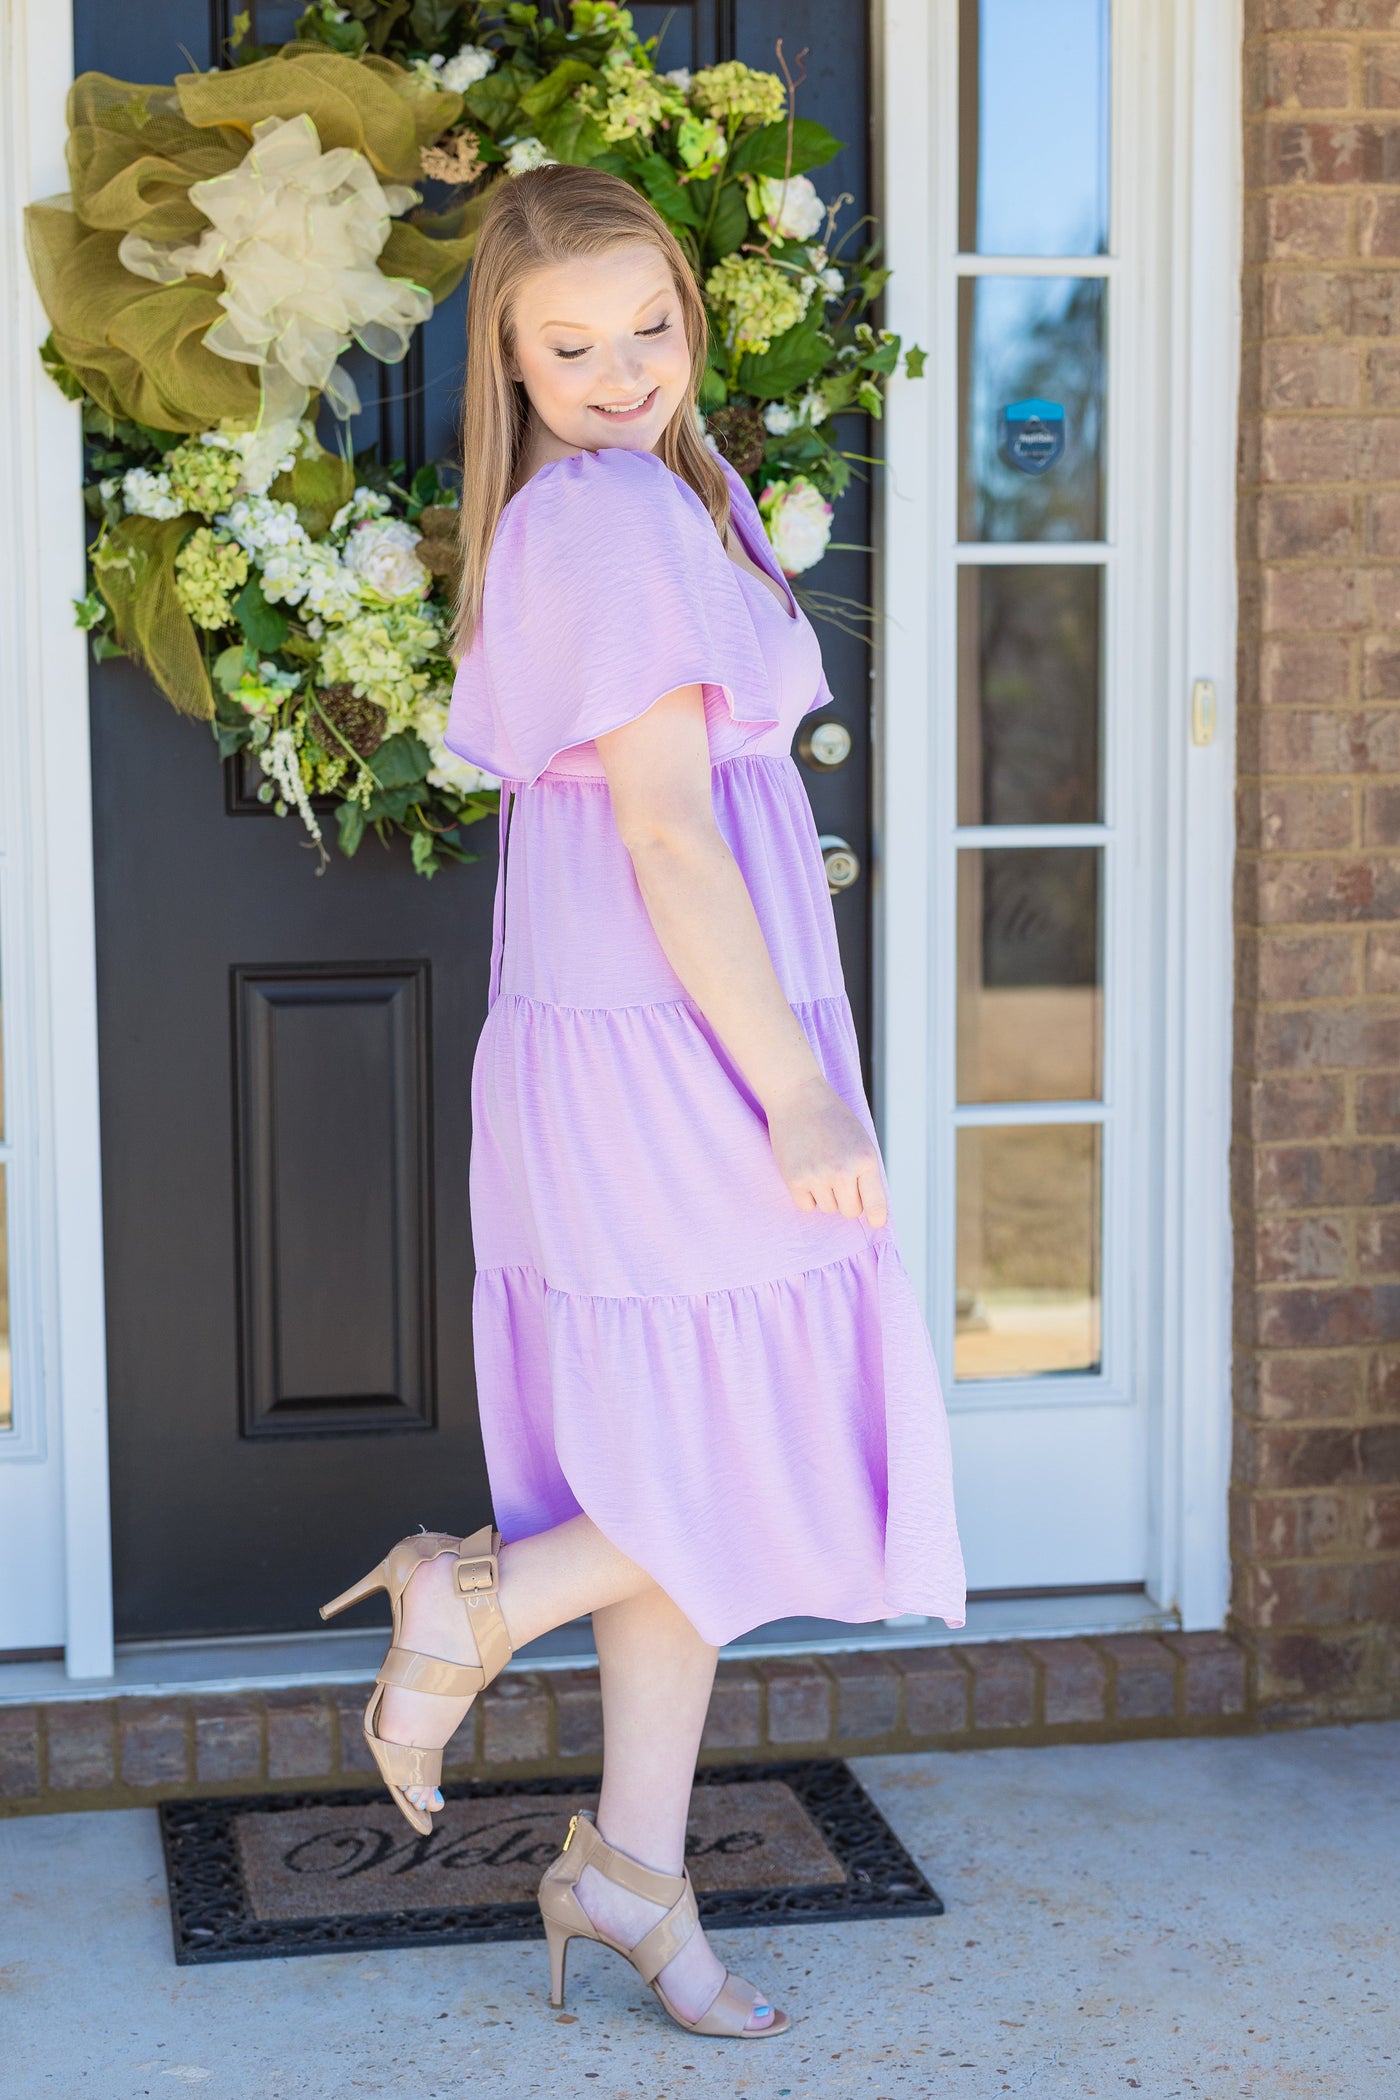 Lavender Haze Tiered Midi Easter Dress by She & Sky